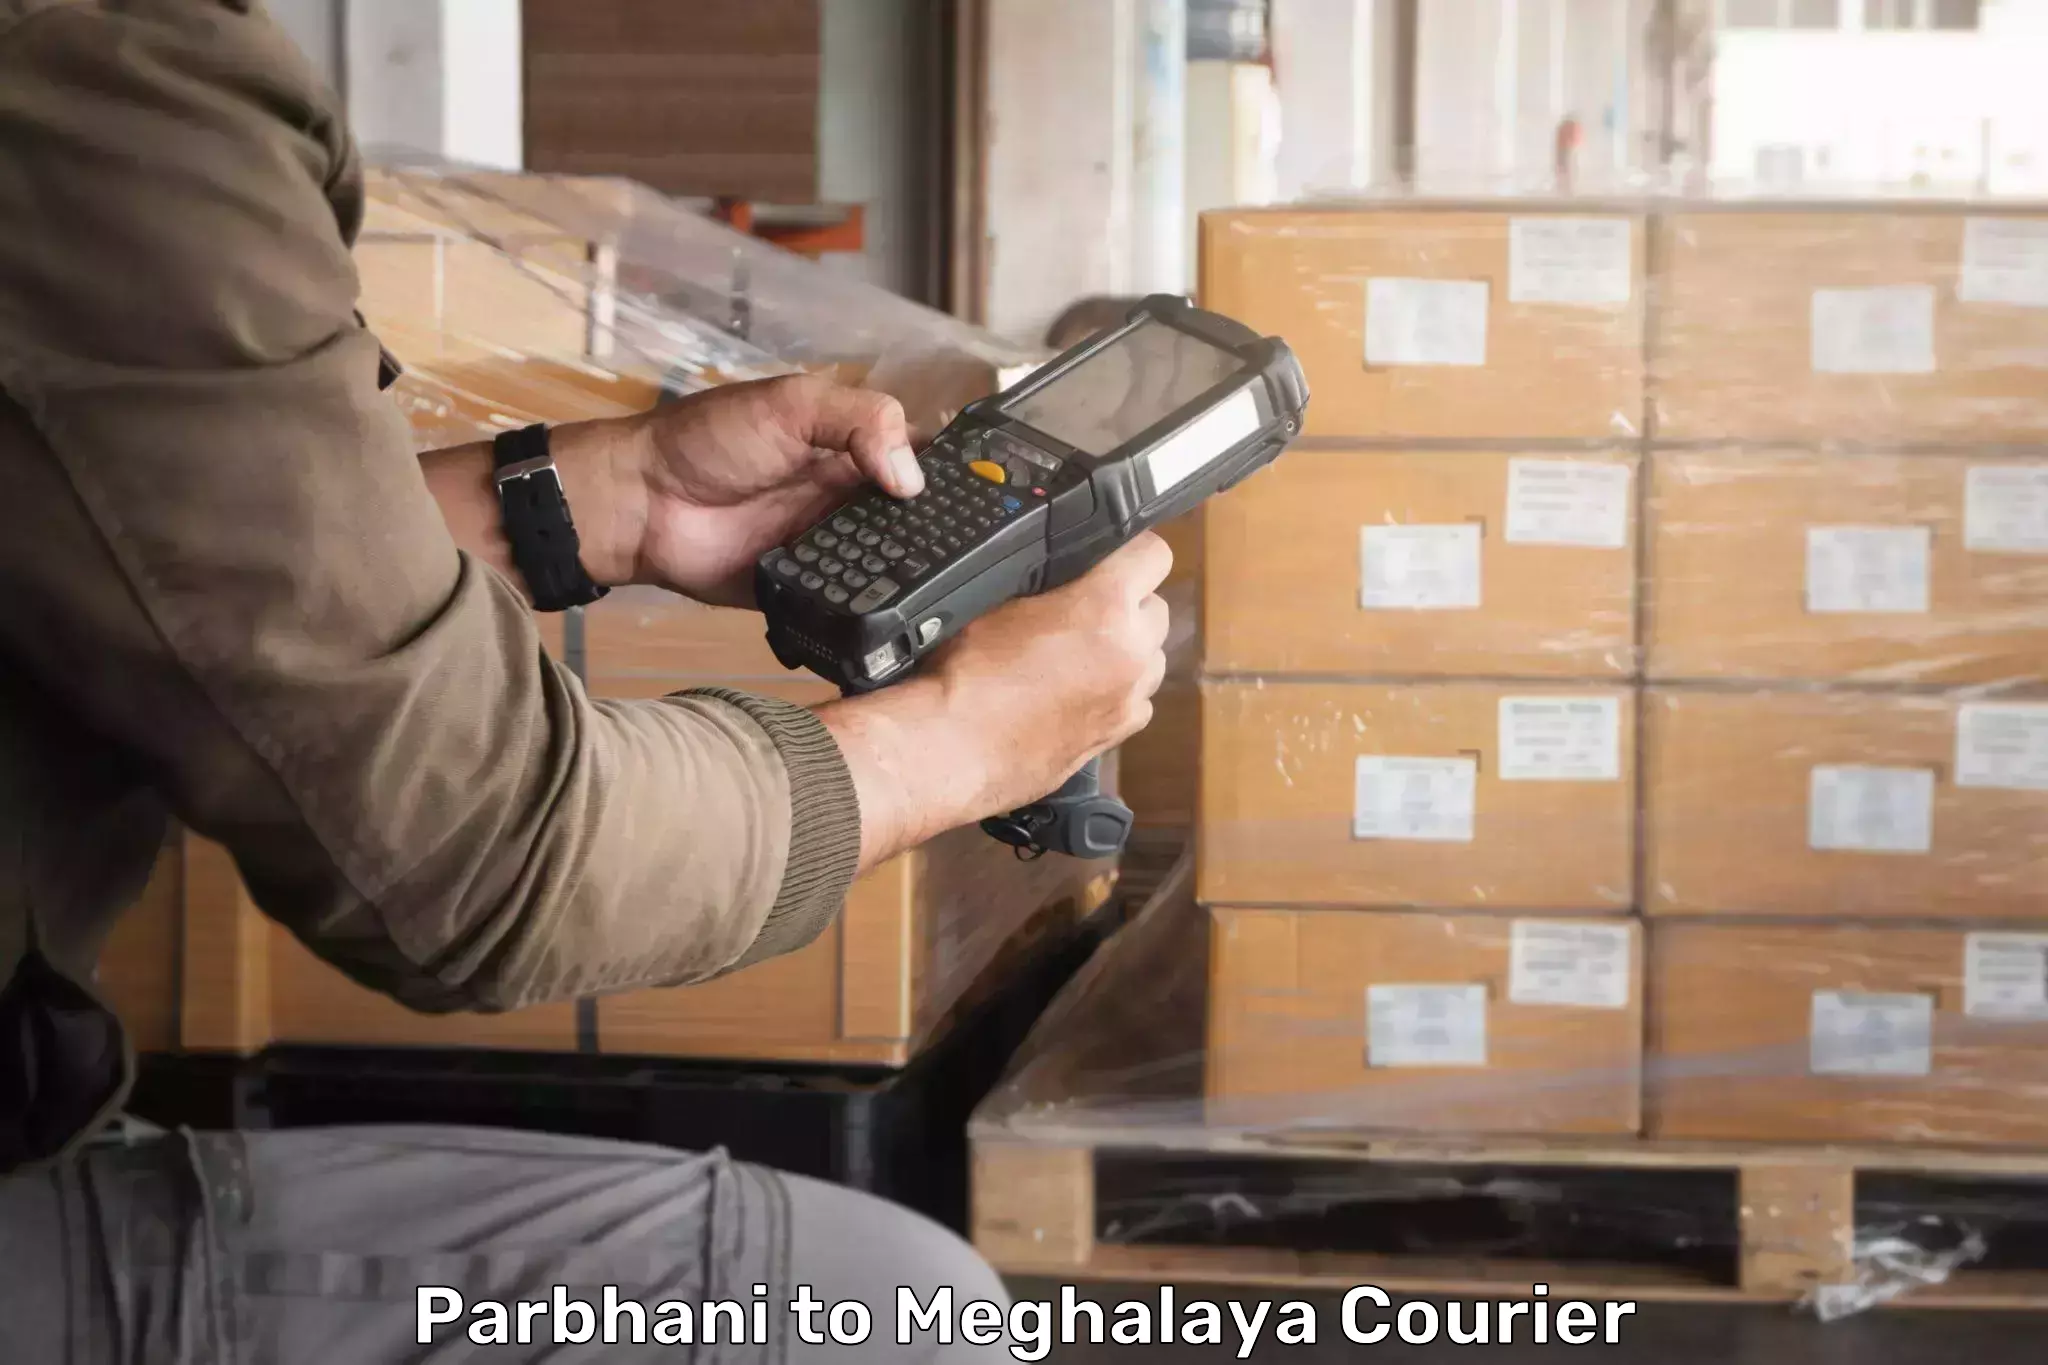 Courier service innovation Parbhani to Shillong